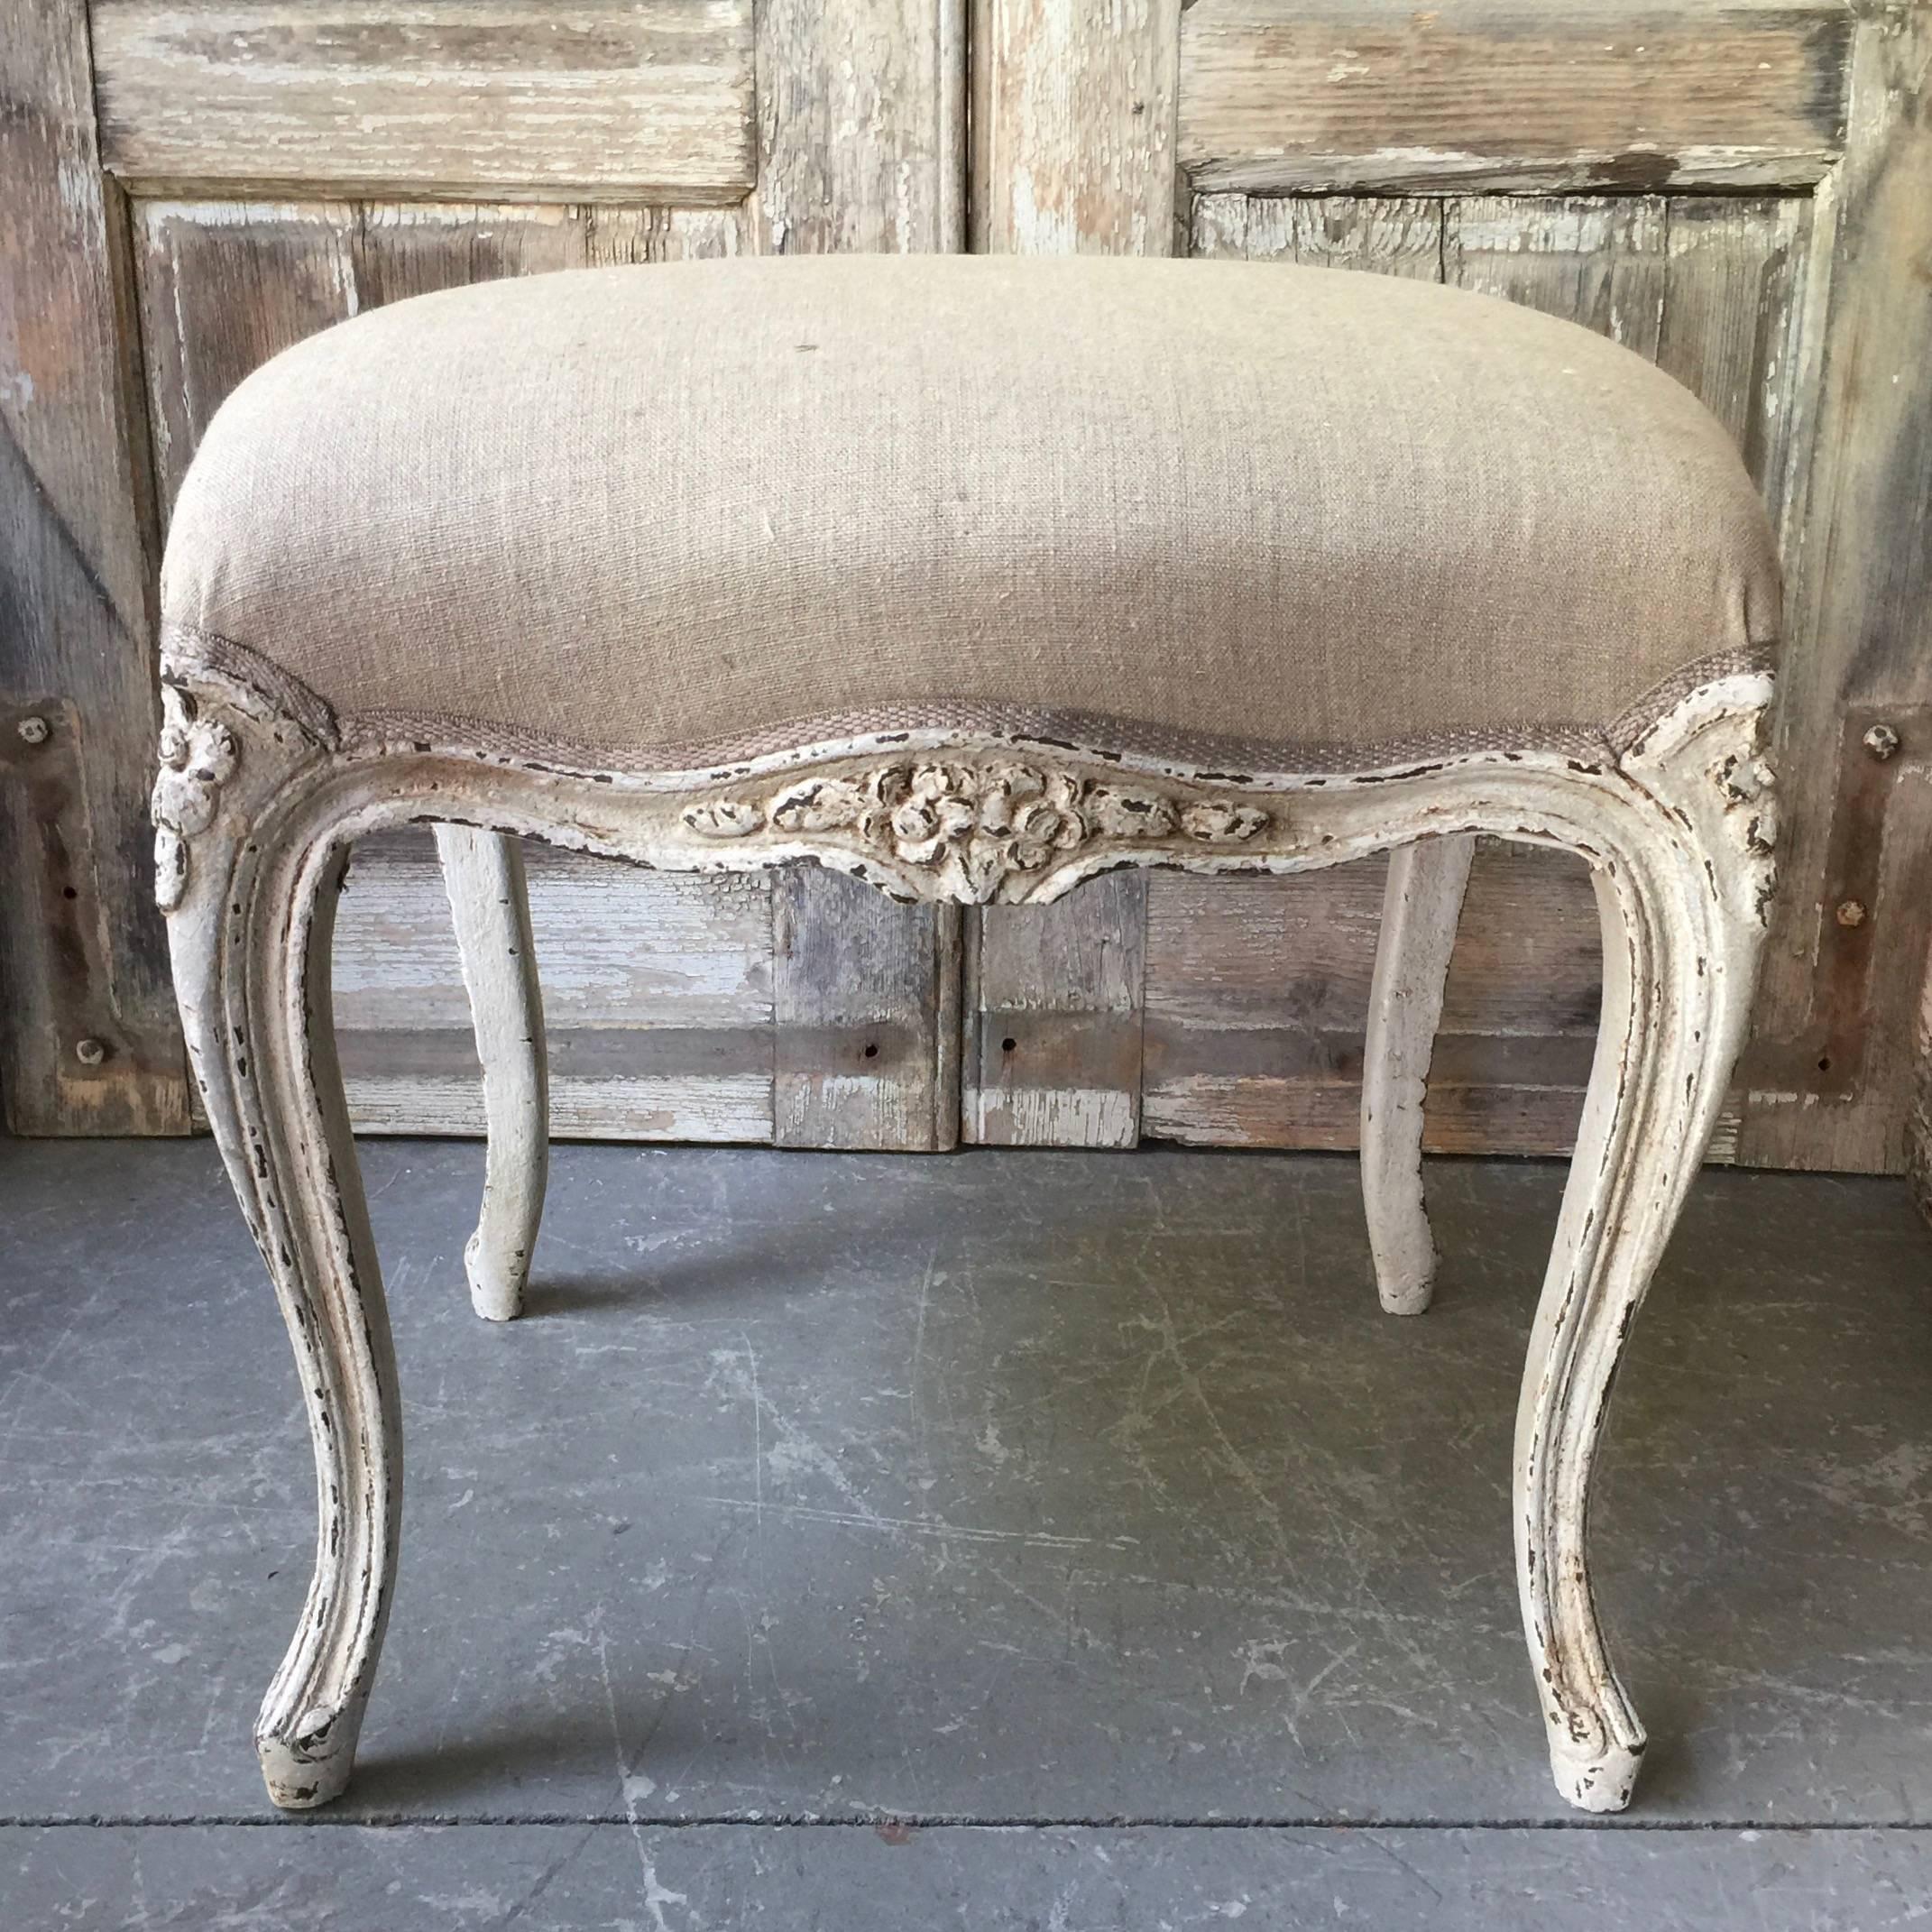 A painted footstool/bench in Louis XV style with scalloped frieze, raised on slender cabriole legs. Upholstered in linen with Classic gimp trim,
France, circa 1900.
Here are few examples … surprising pieces and objects, authentic, decorative and